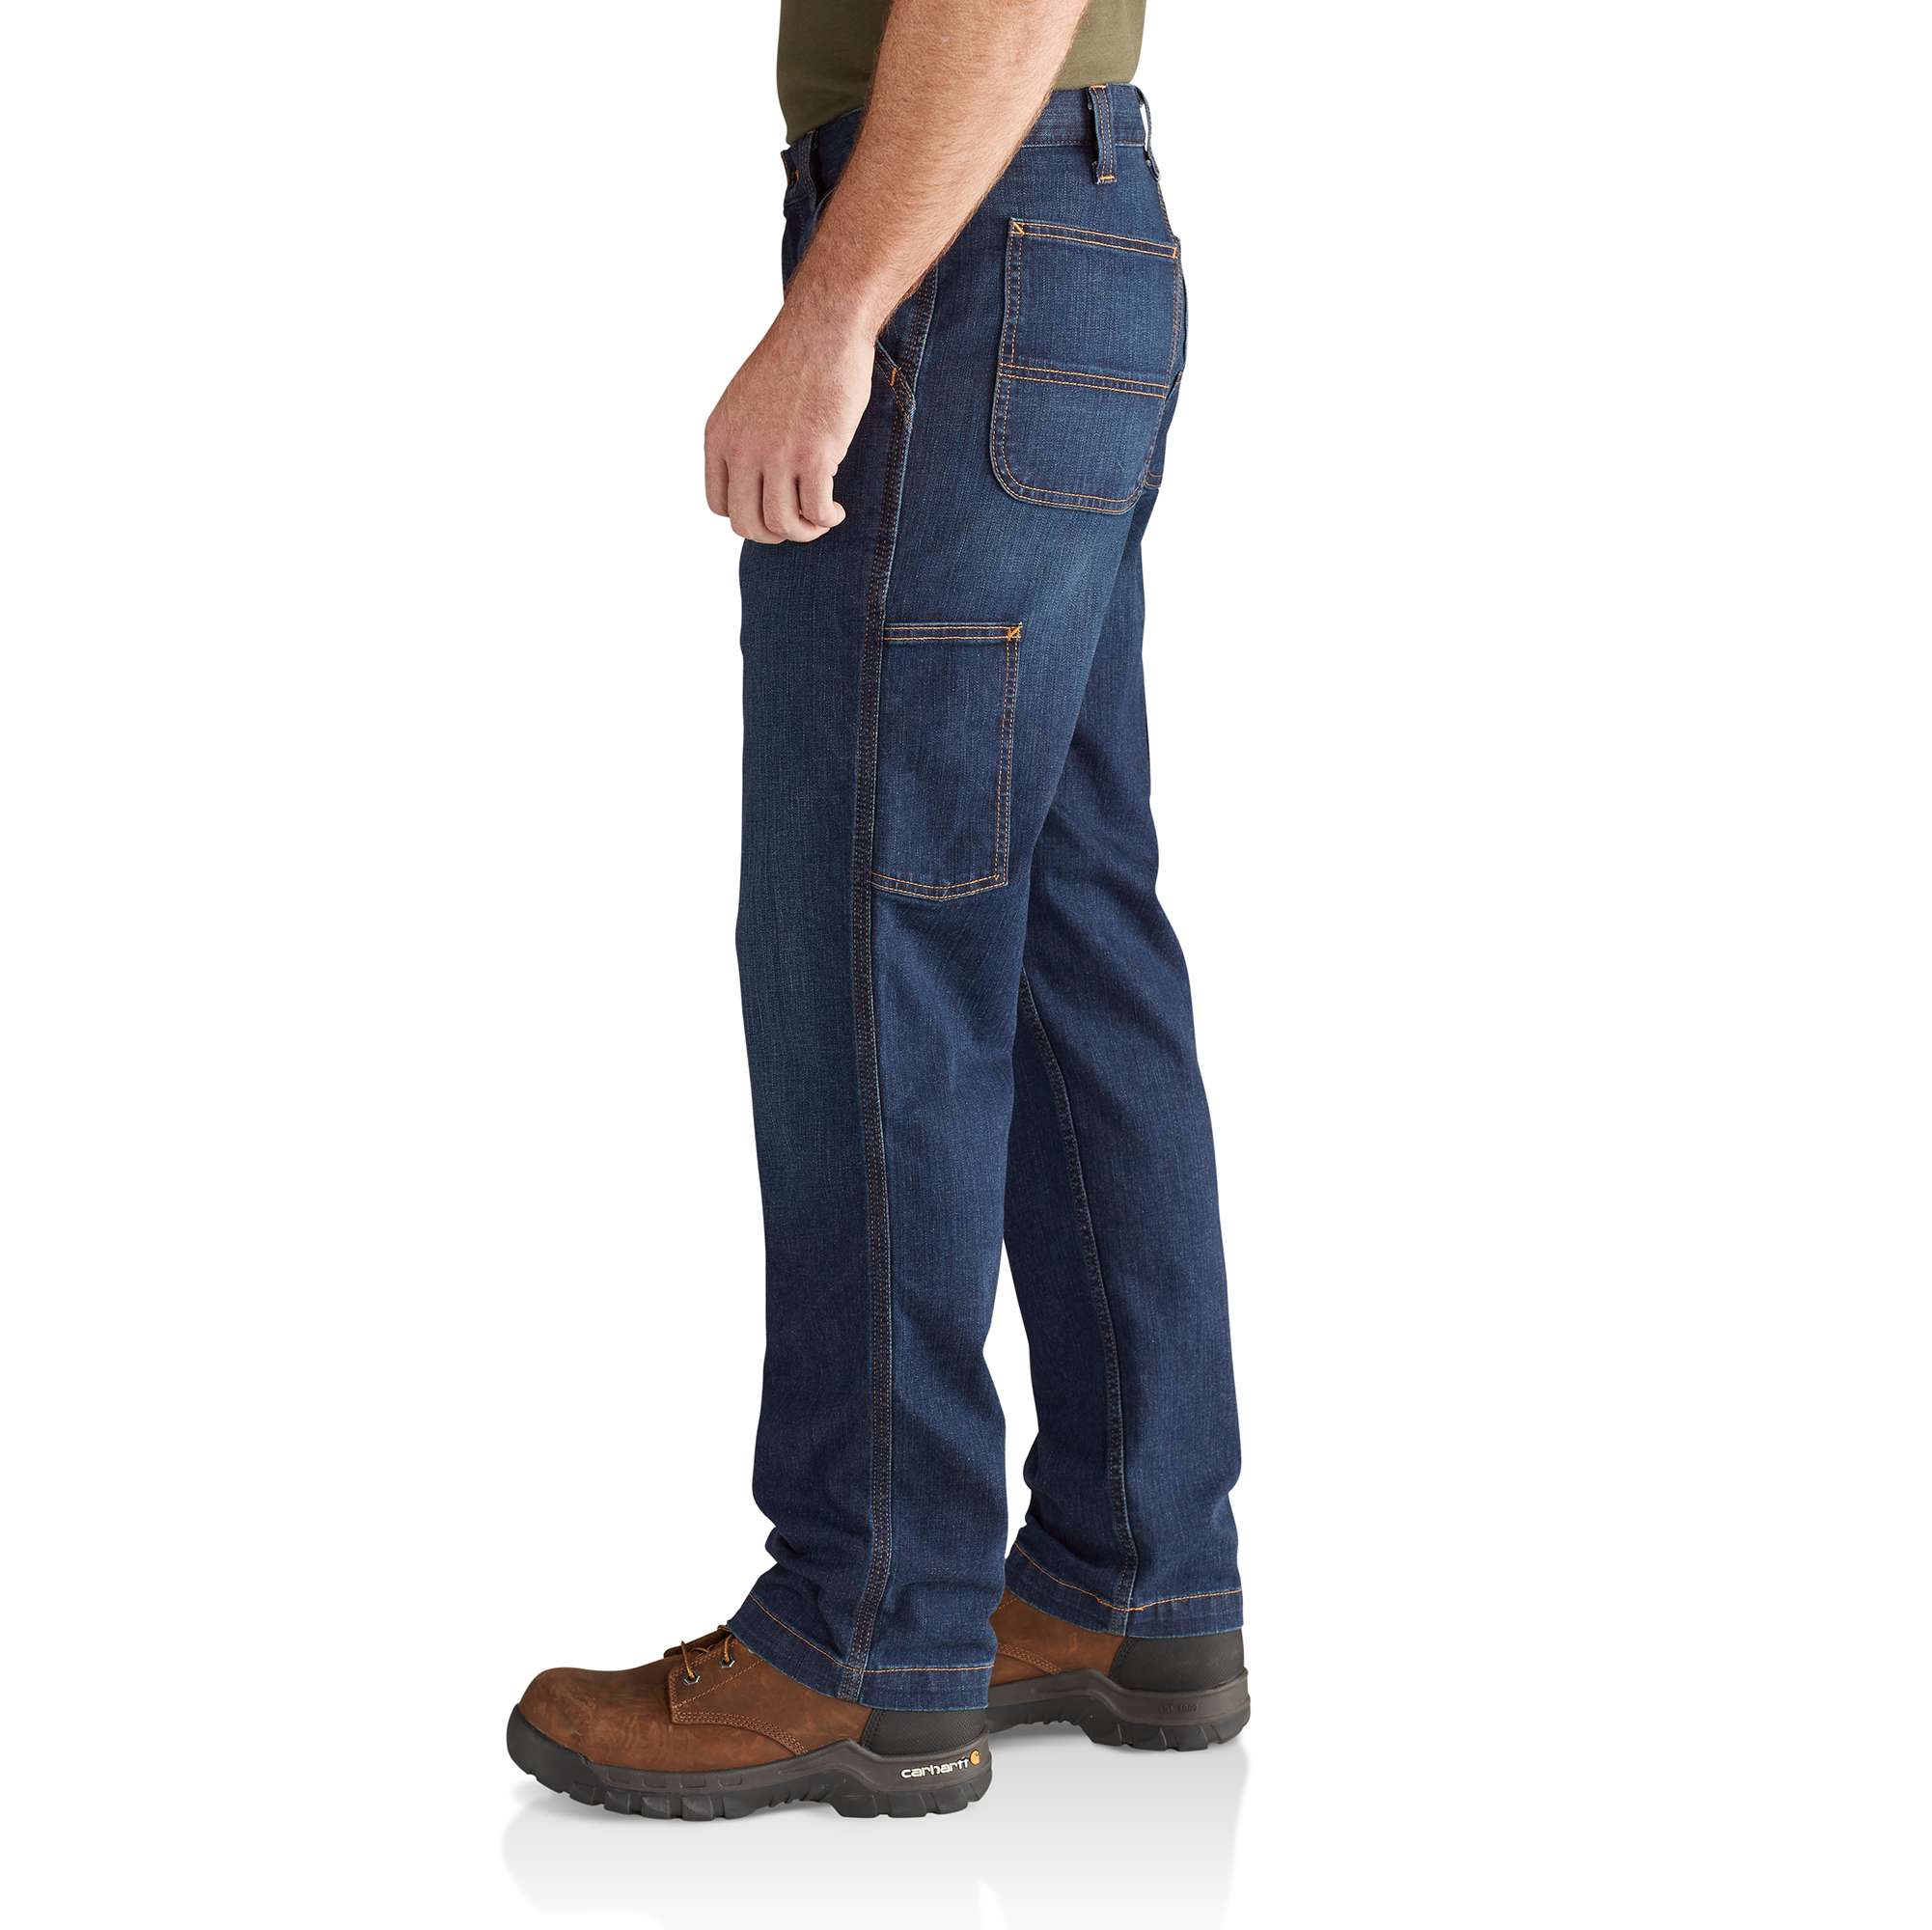 Work Pants - Workwear Express - Workwear and Uniforms Central Coast,  Promotional Items, Corporate Gifts and Uniform Solutions ::